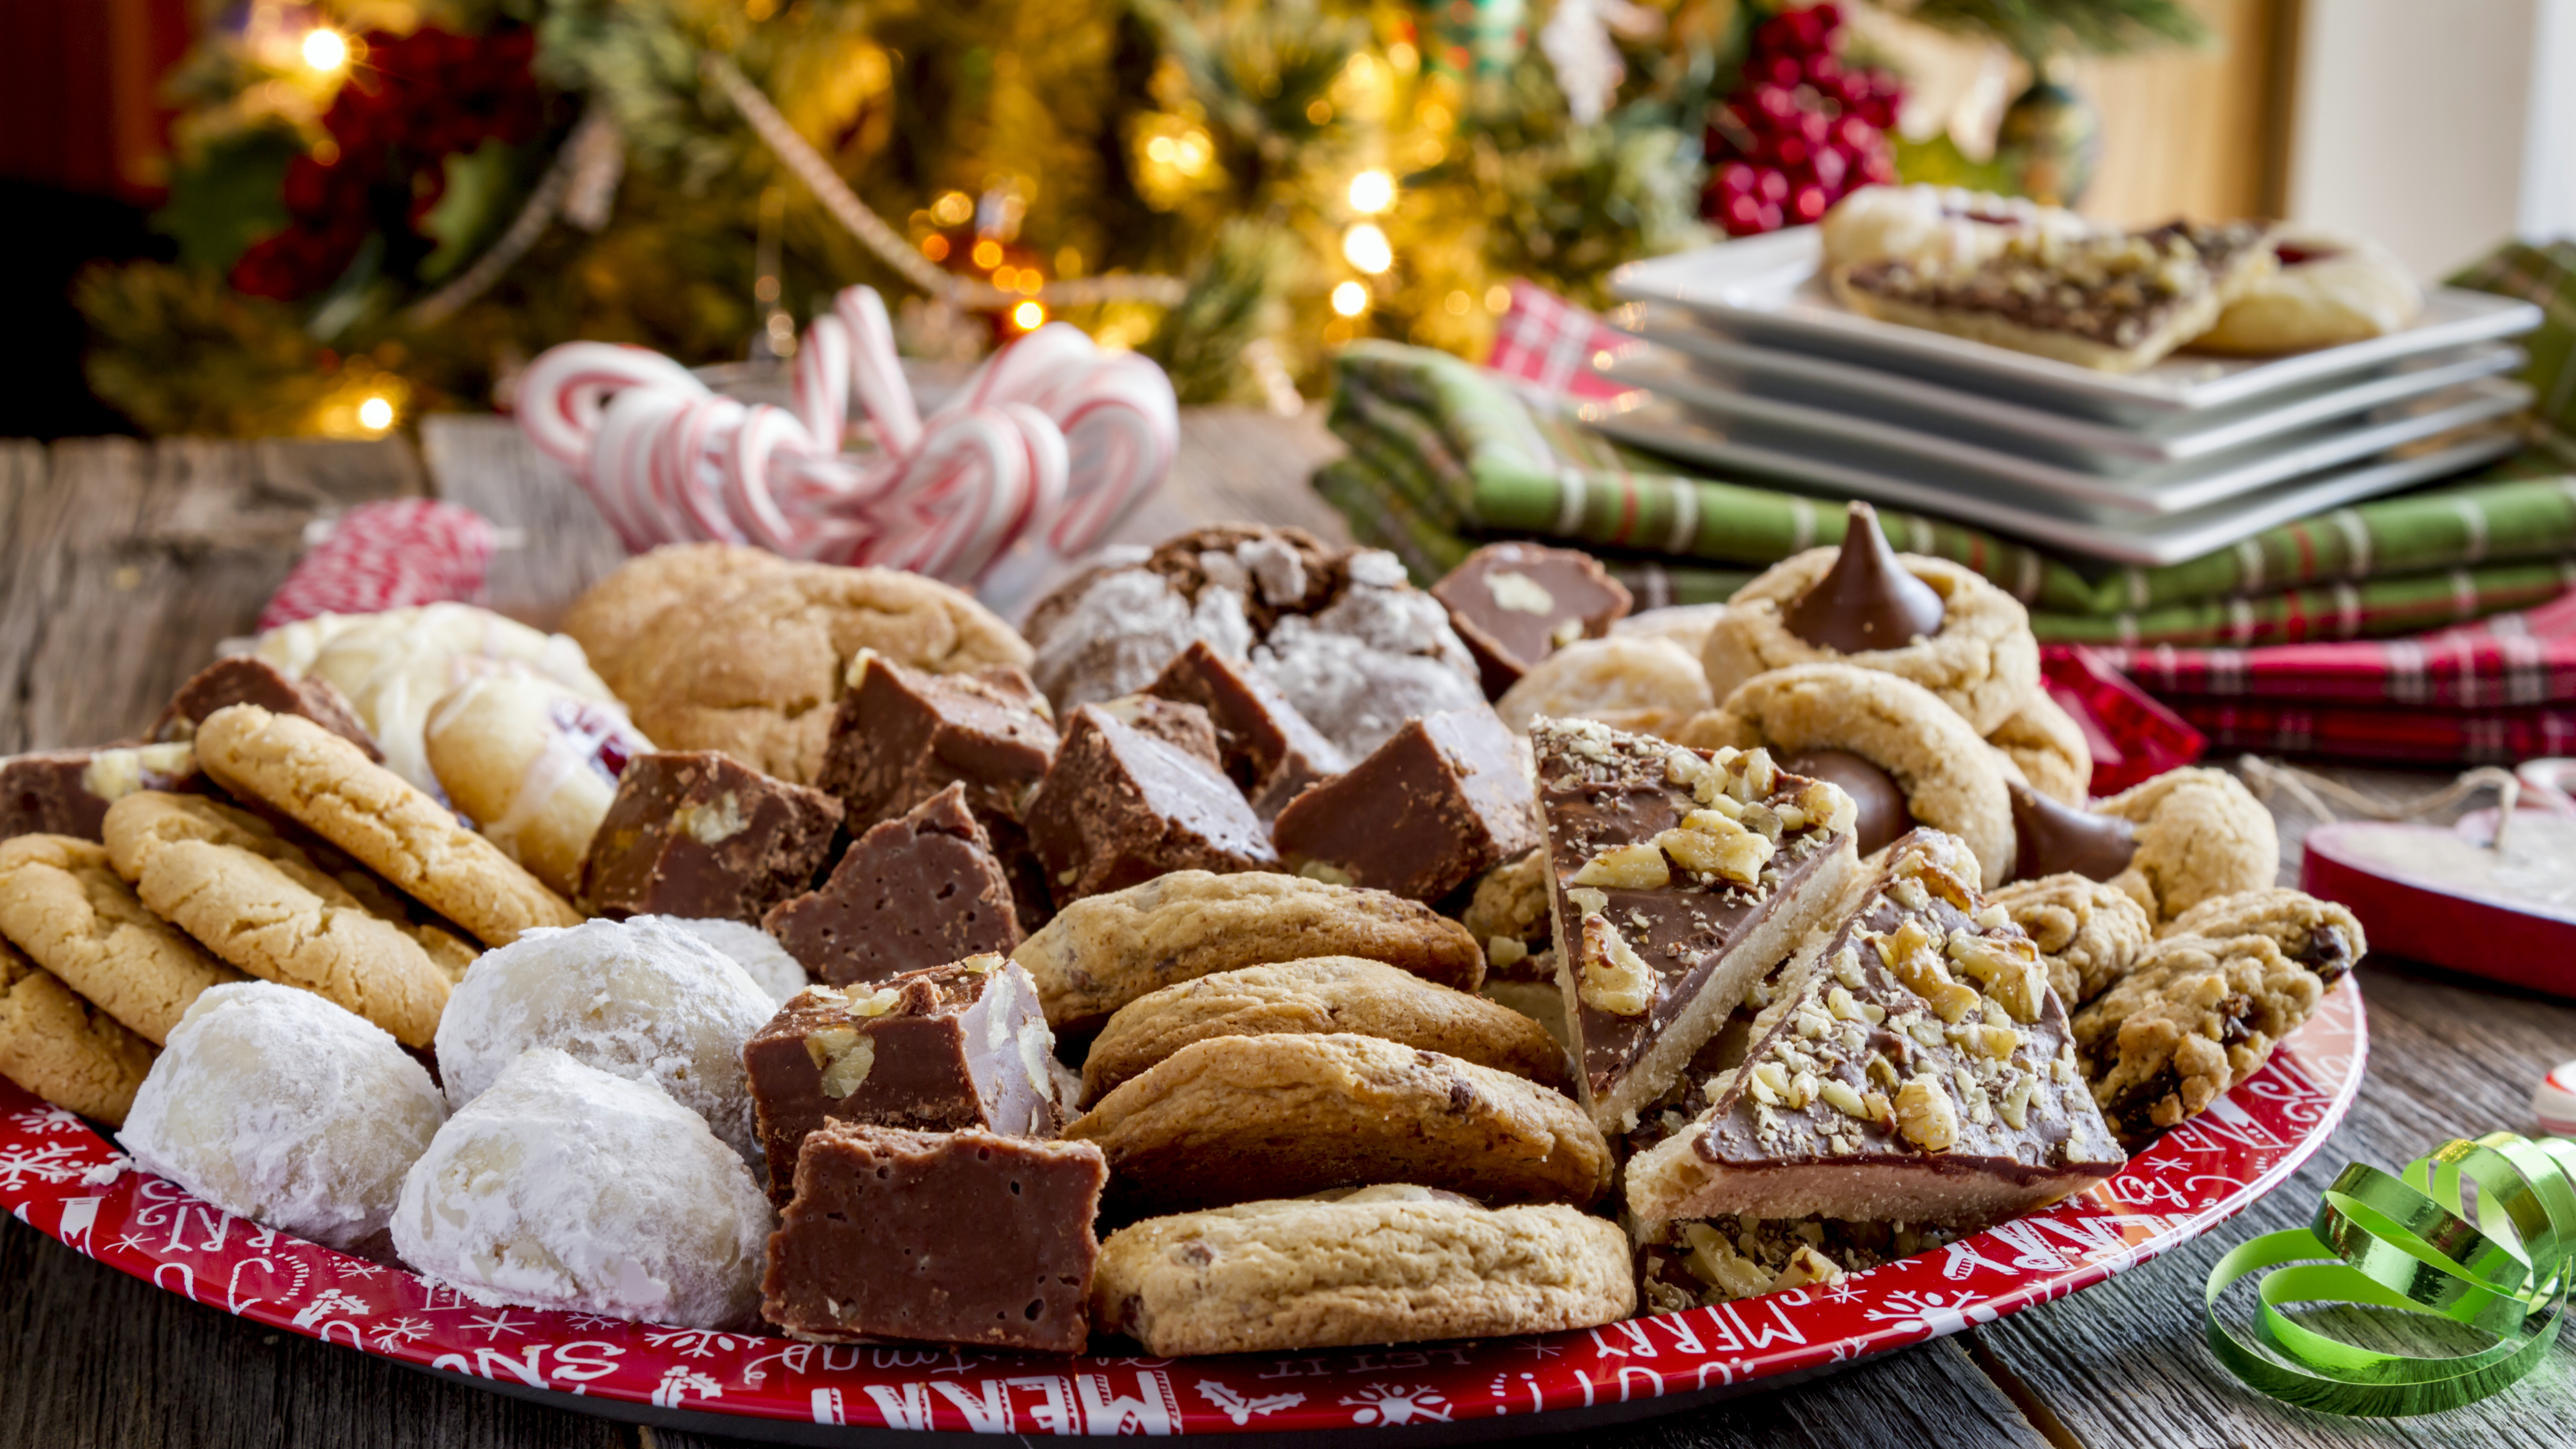 a large plate of sugar cookies and holiday treats for dessert